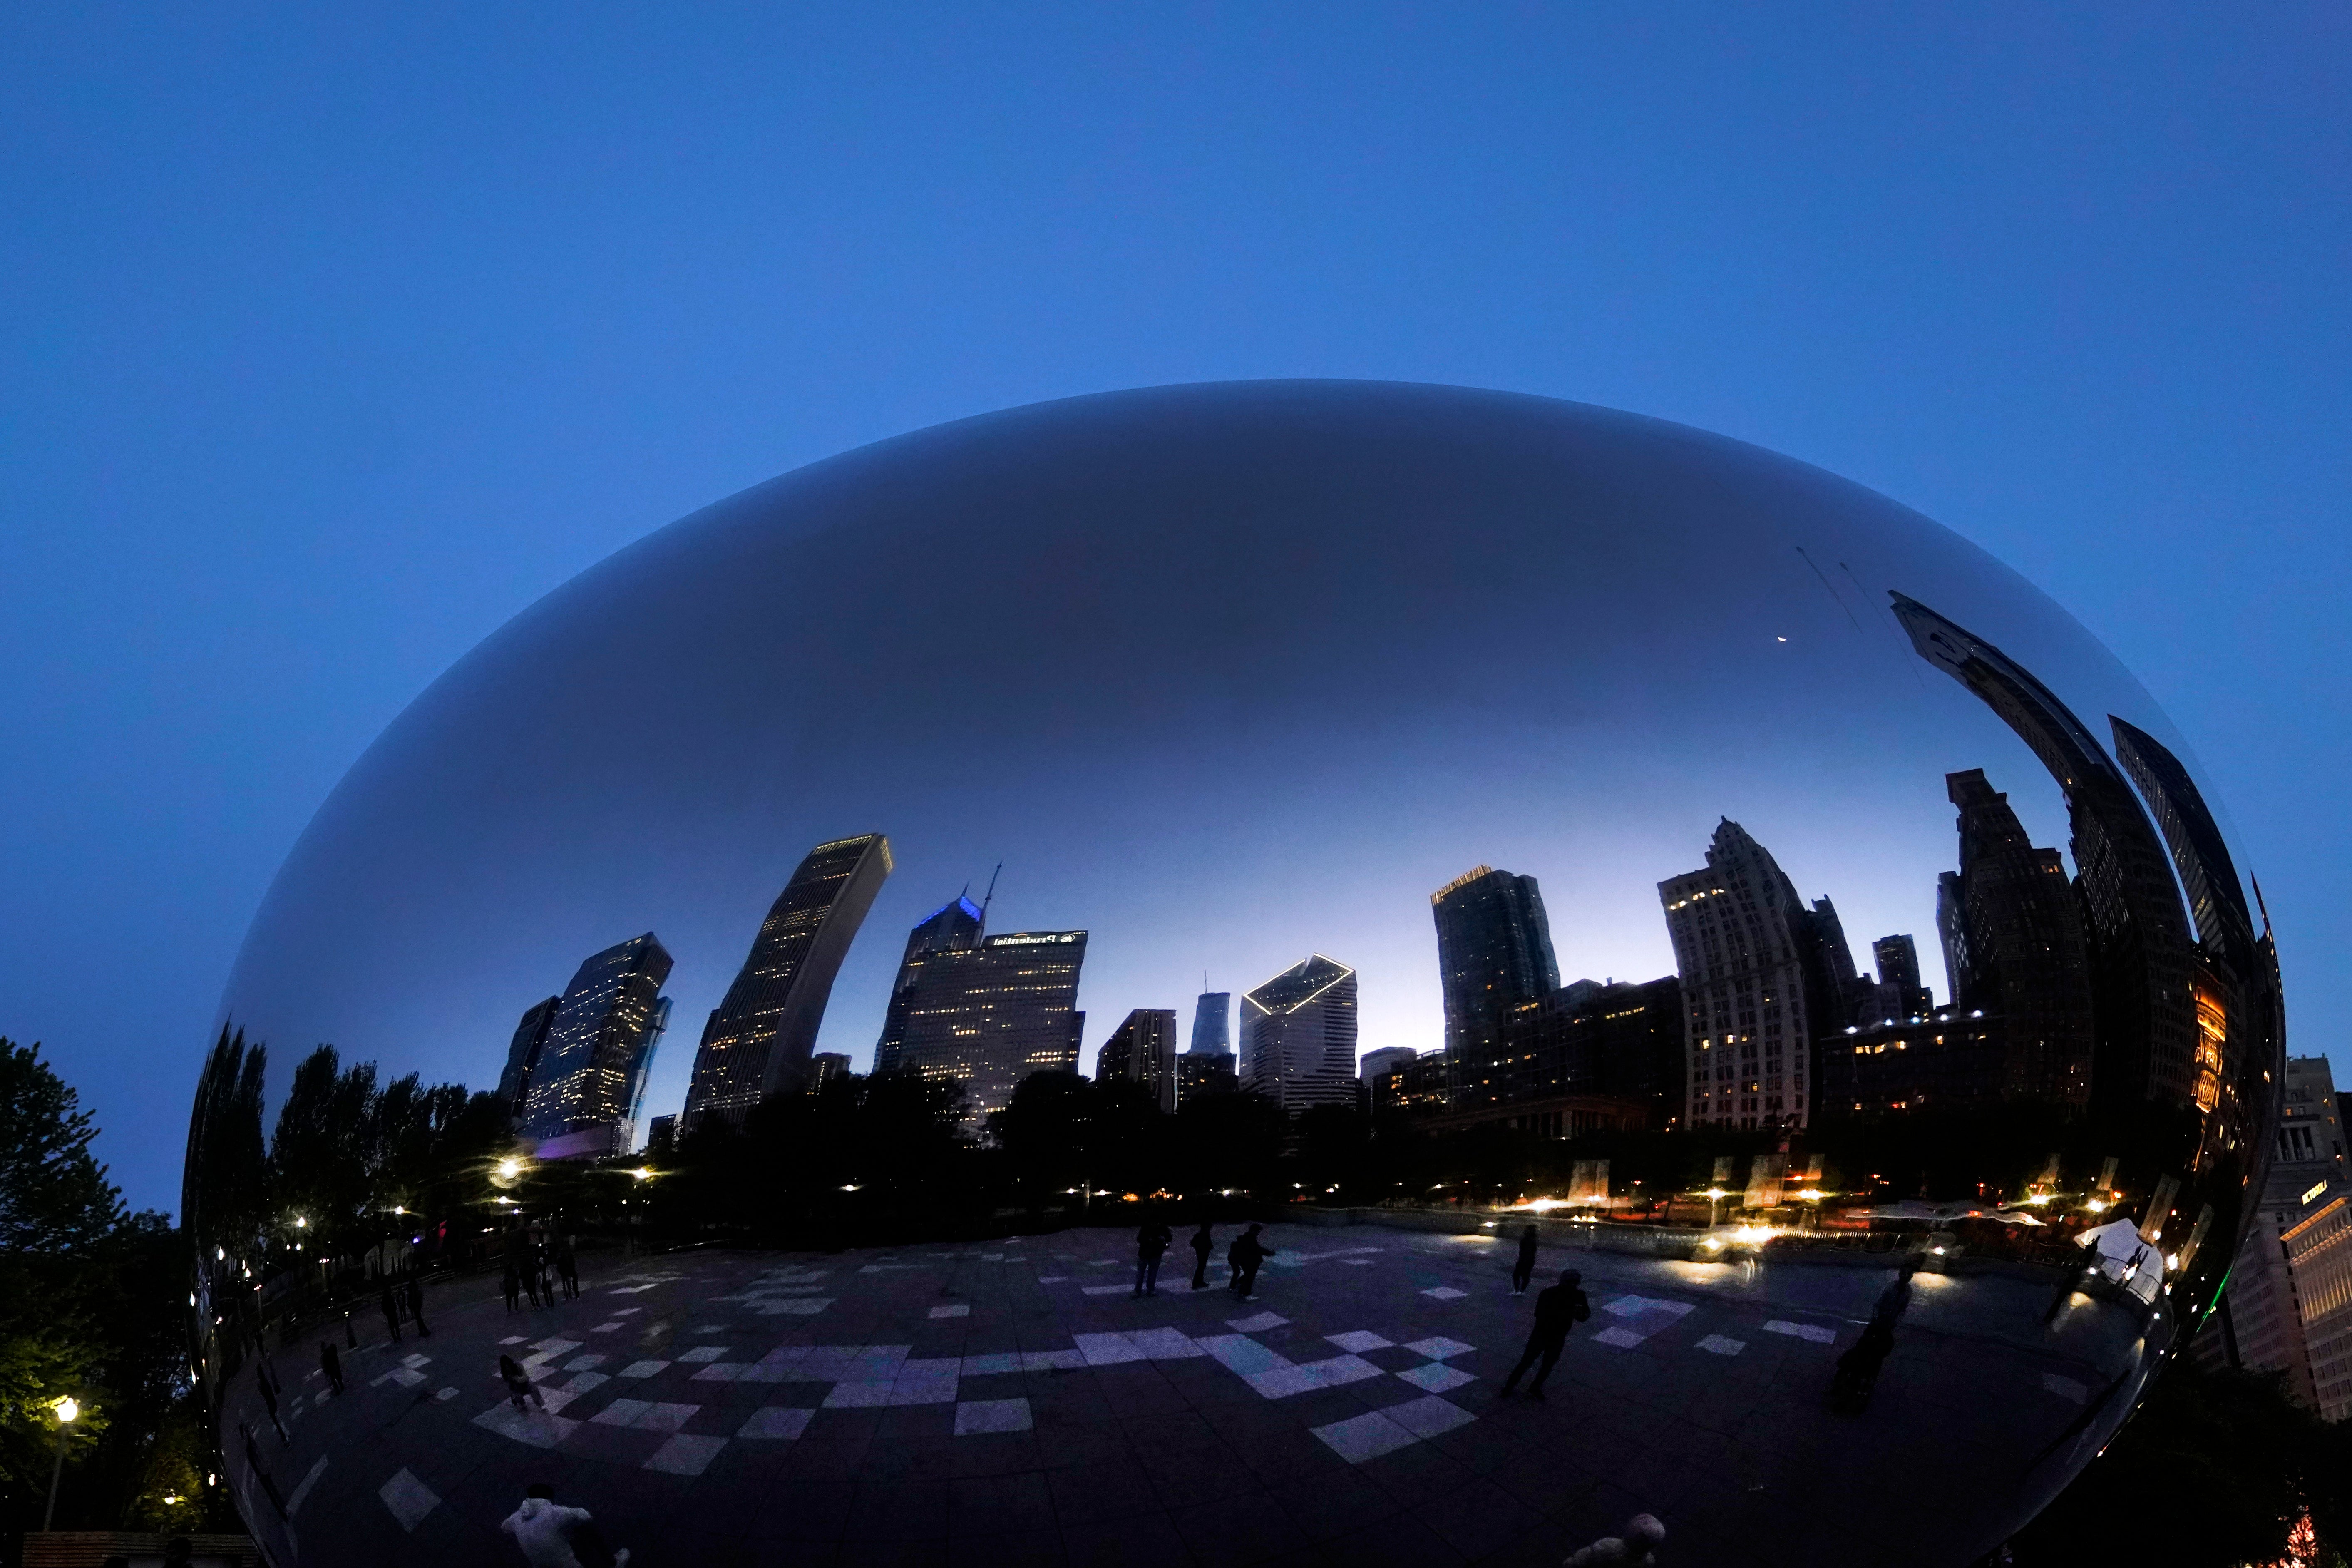 The Chicago skyline is reflected on Anish Kapoor’s stainless steel sculpture Cloud Gate, also known as ‘The Bean’